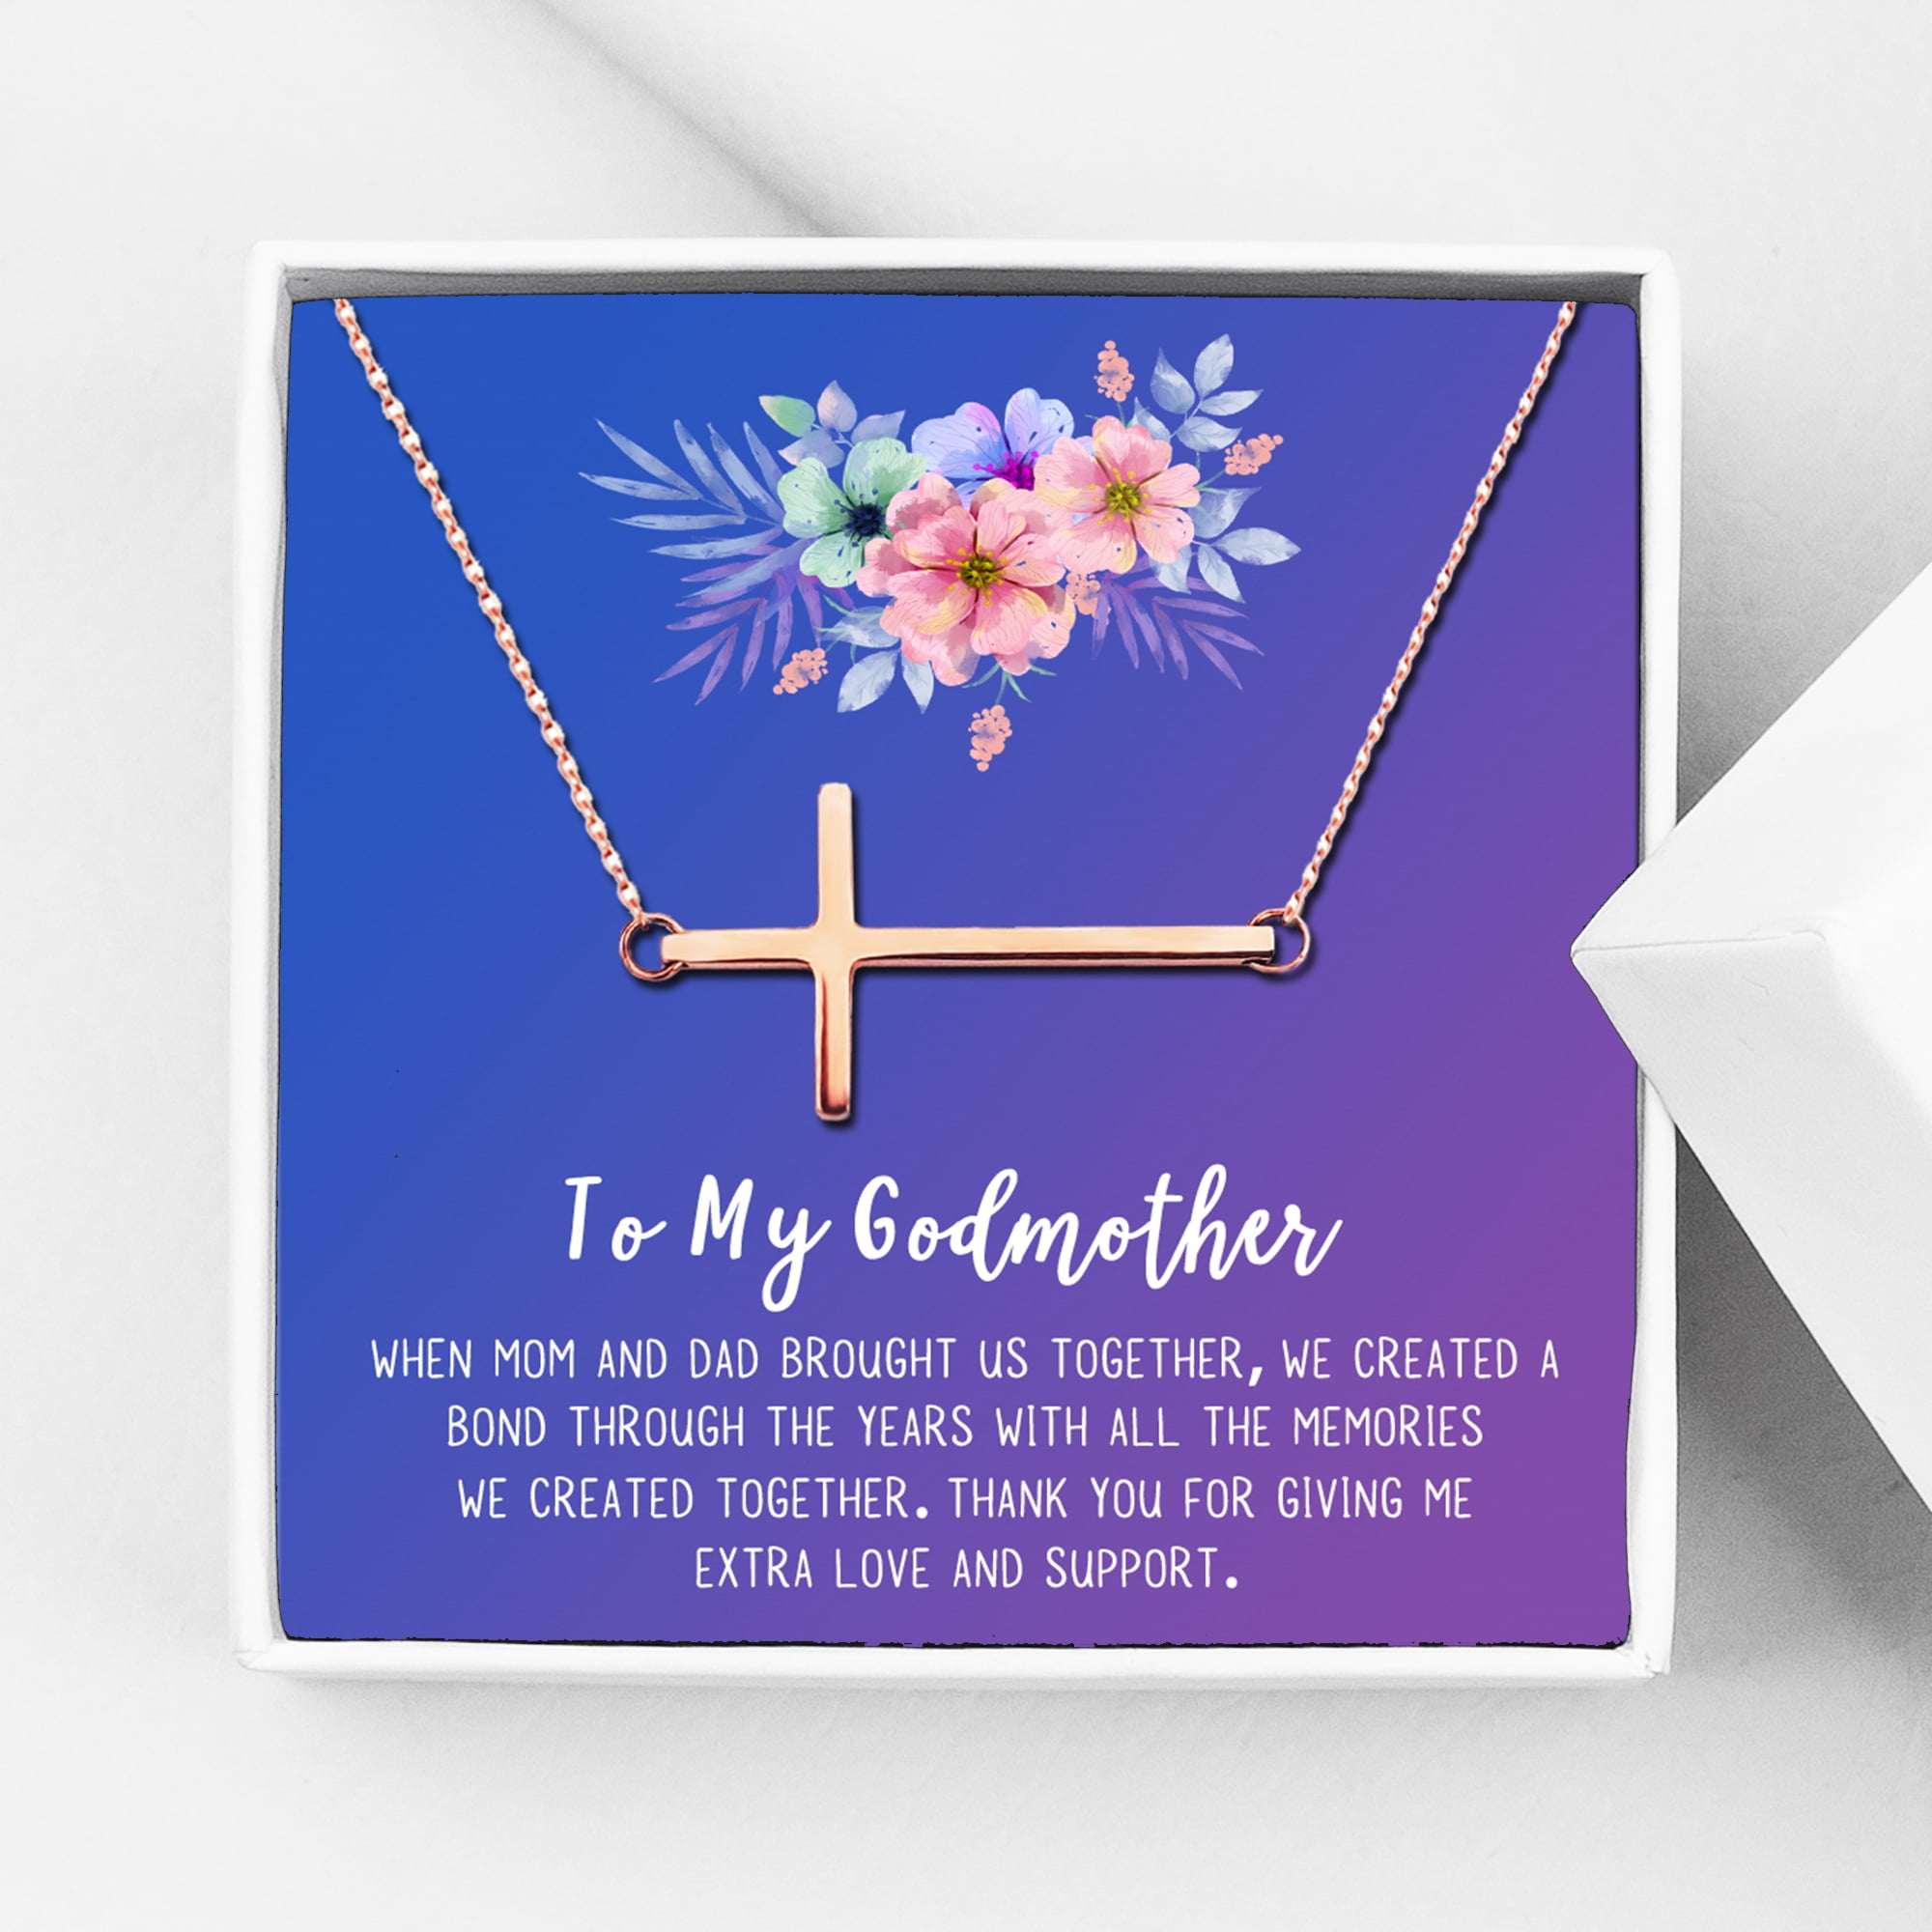 Mother's Day Gift Card for Godmother Godmother Thank You Card, 